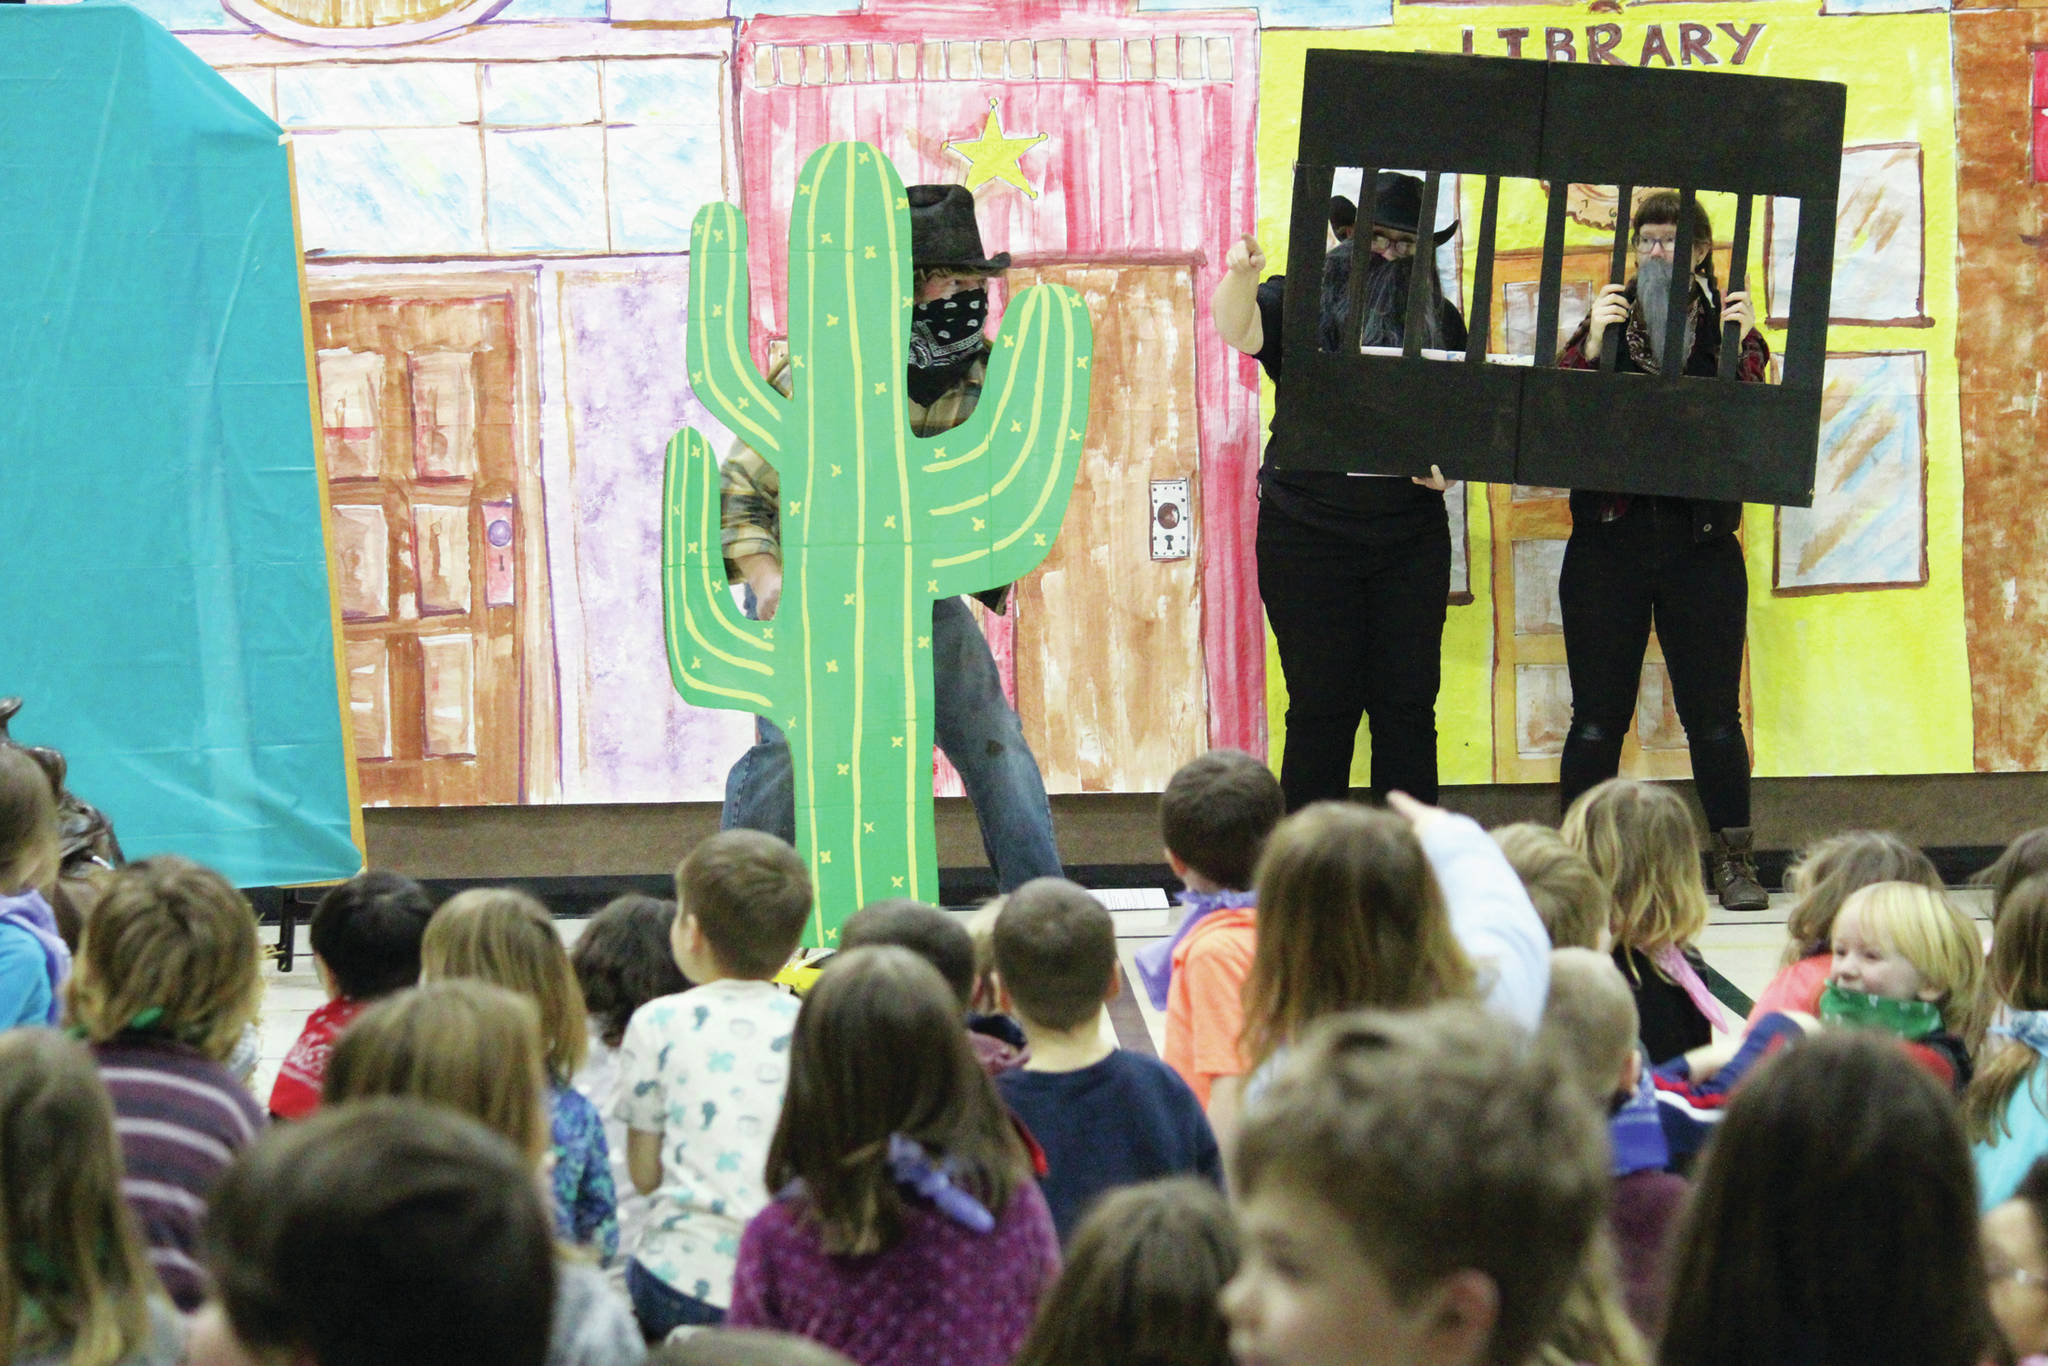 Paul Banks Elementary School staff member Jake Parrett hides behind a makeshift cactus whilst pretending to be a bandit during an assembly celebrating the start of the school’s annual read-a-thon on Feb. 3, 2020 at the school in Homer, Alaska. To his right are Jeri McLean and Maria Fourier. (Photo by Megan Pacer/Homer News)